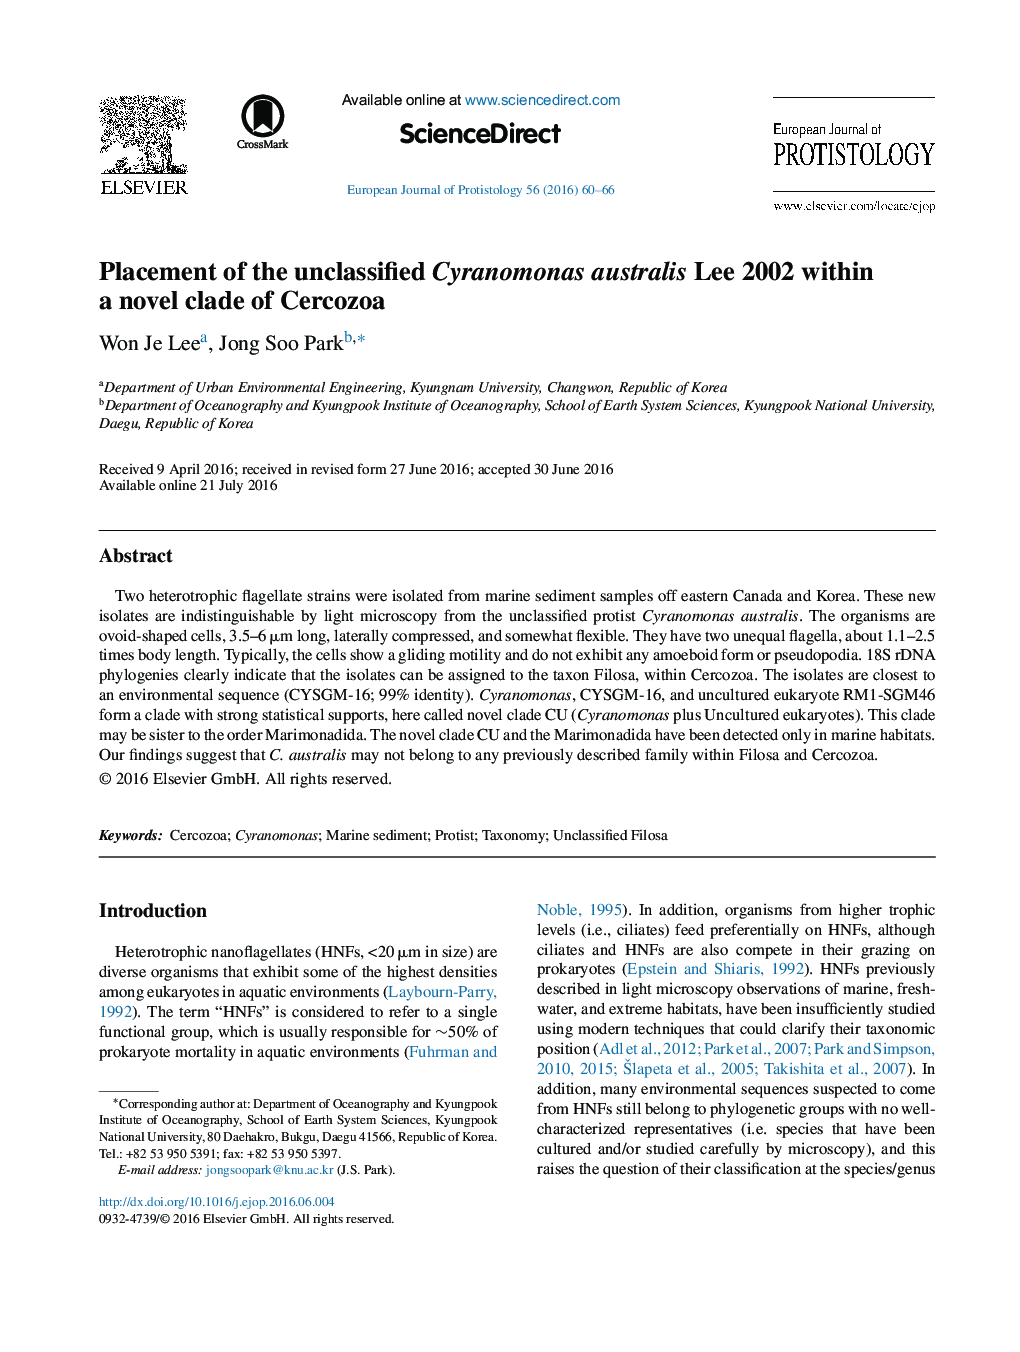 Placement of the unclassified Cyranomonas australis Lee 2002 within a novel clade of Cercozoa